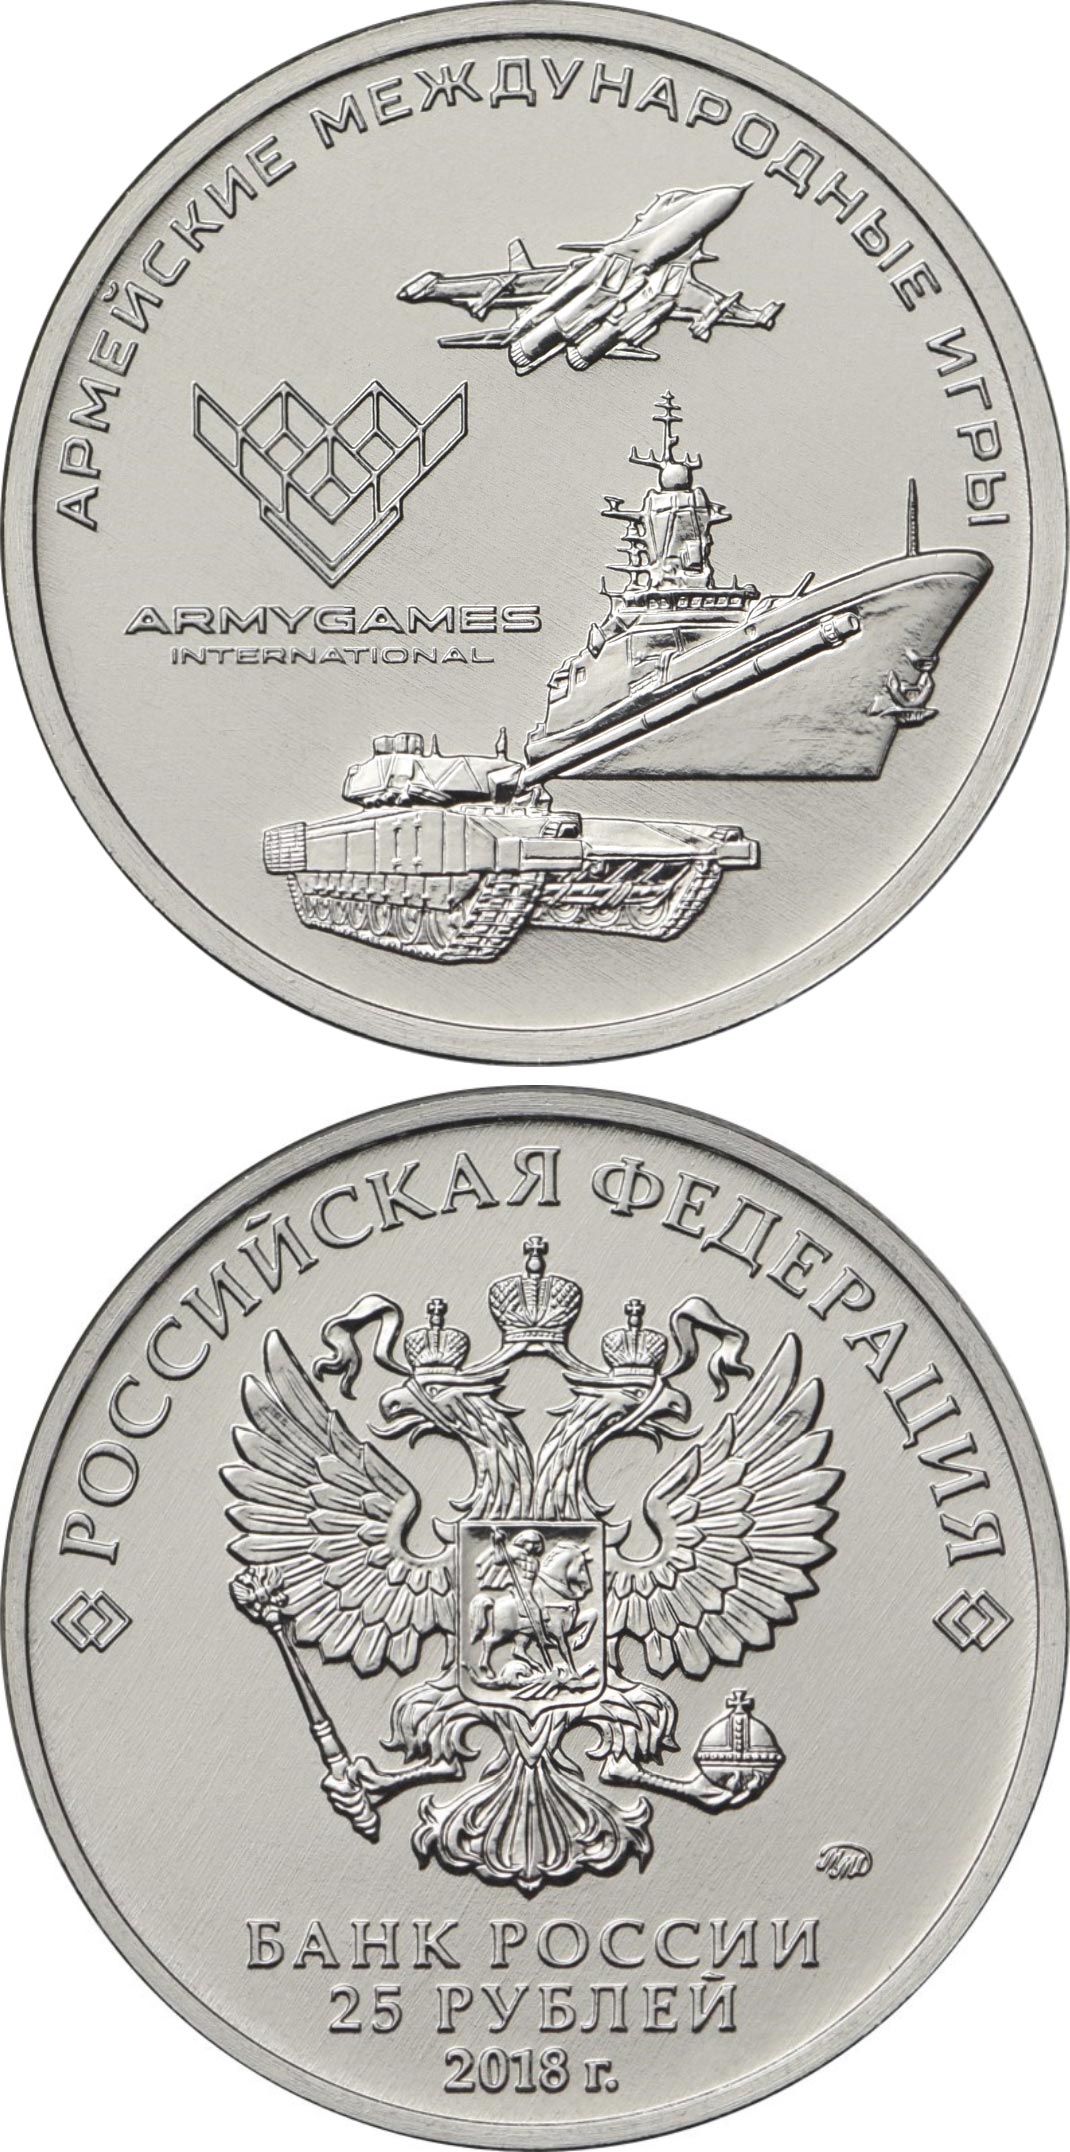 Image of 25 rubles coin - The International Army Games | Russia 2018.  The Copper–Nickel (CuNi) coin is of UNC quality.